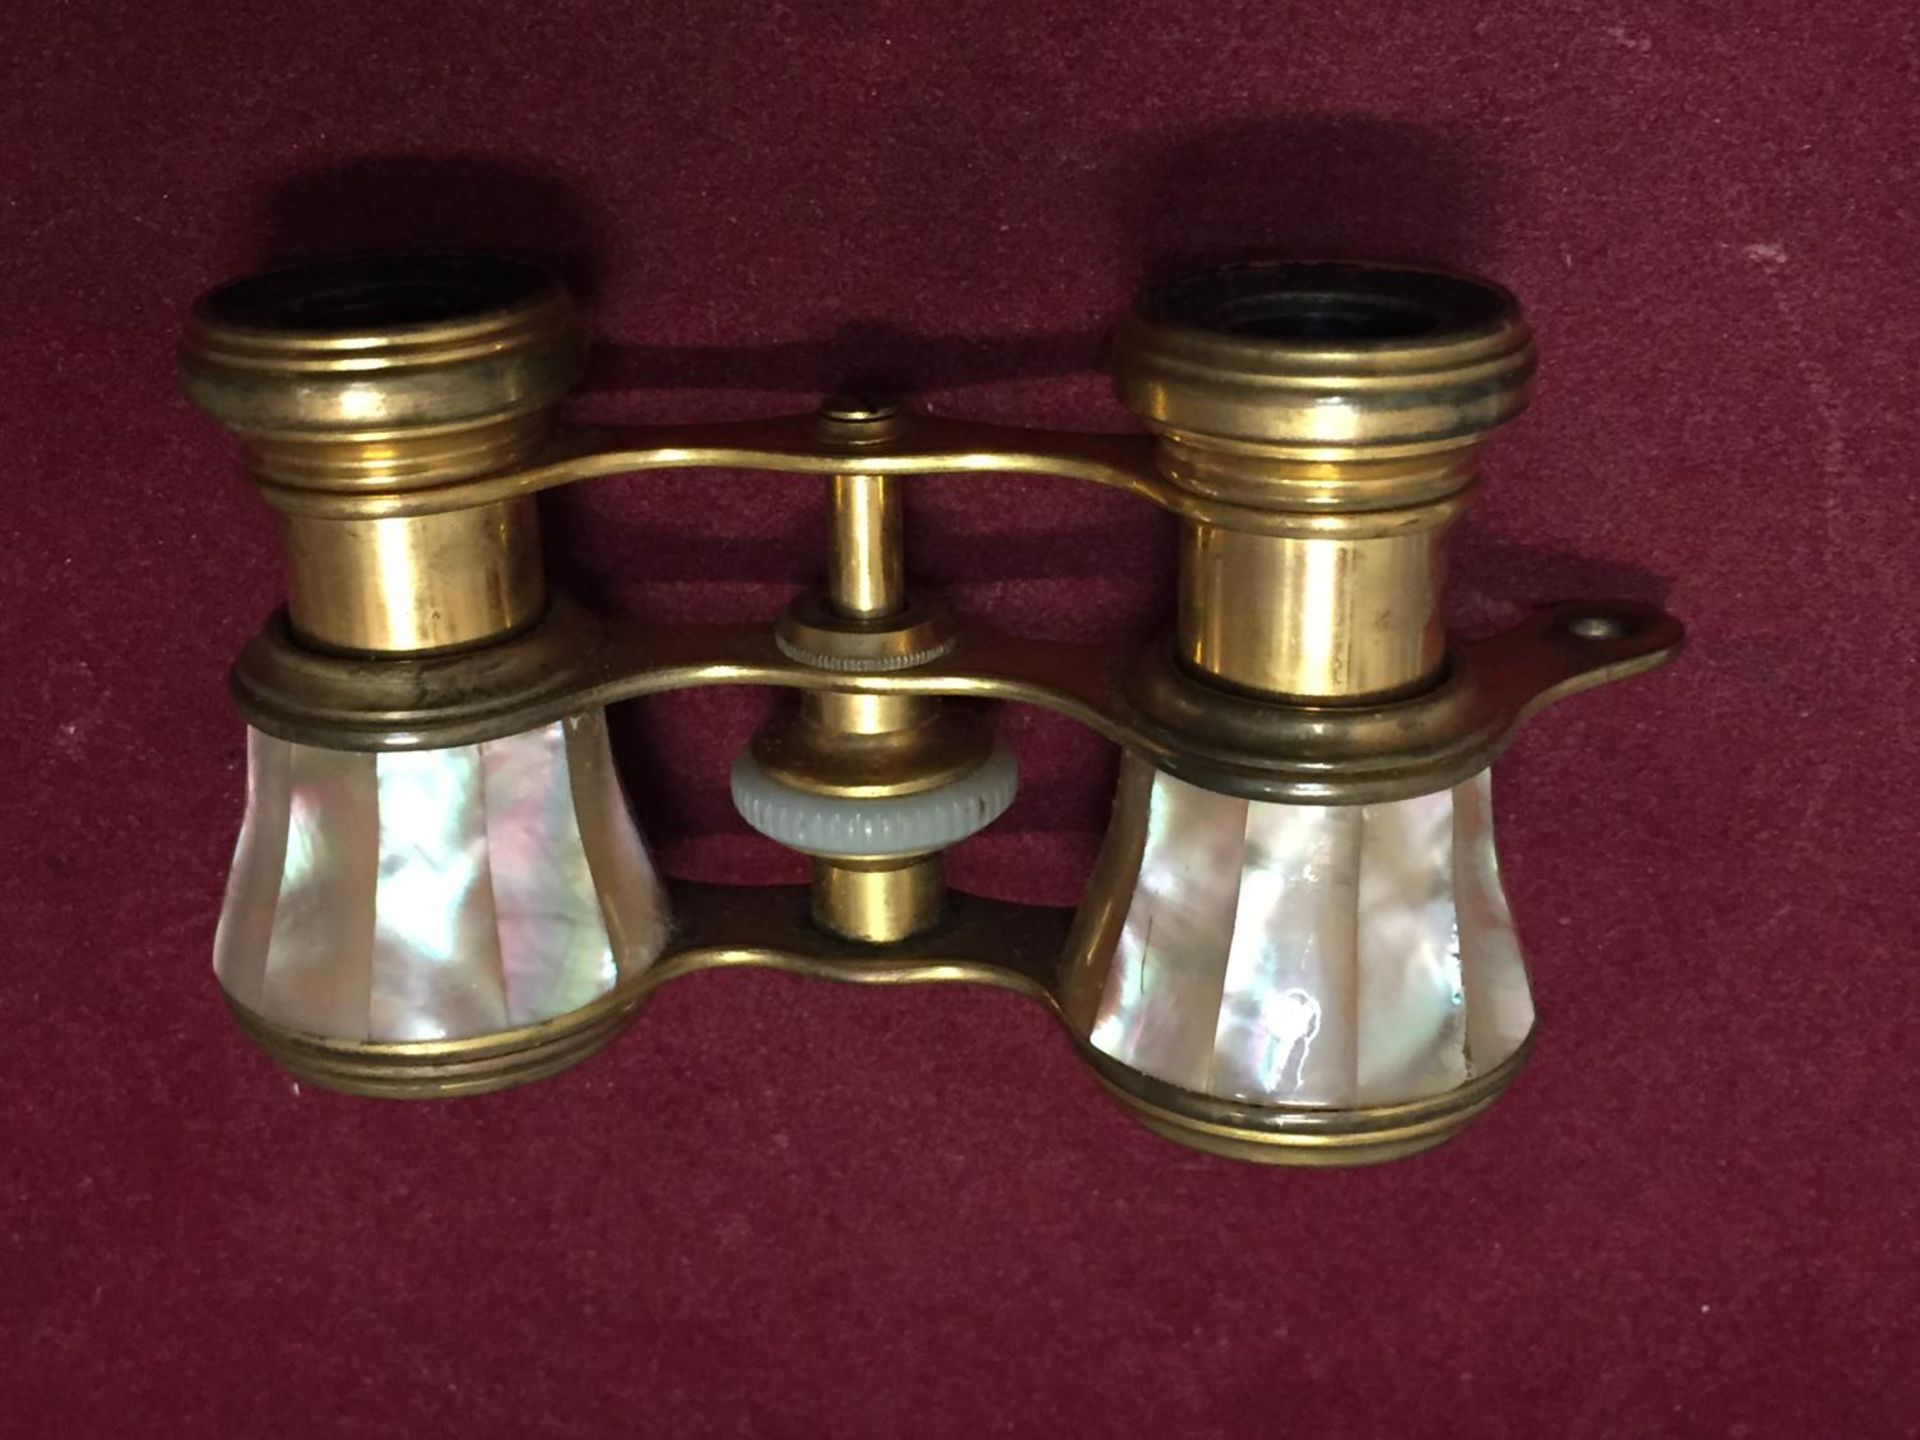 A PAIR OF BRASS AND MOTHER OF PEARL OPERA GLASSES - Image 4 of 4